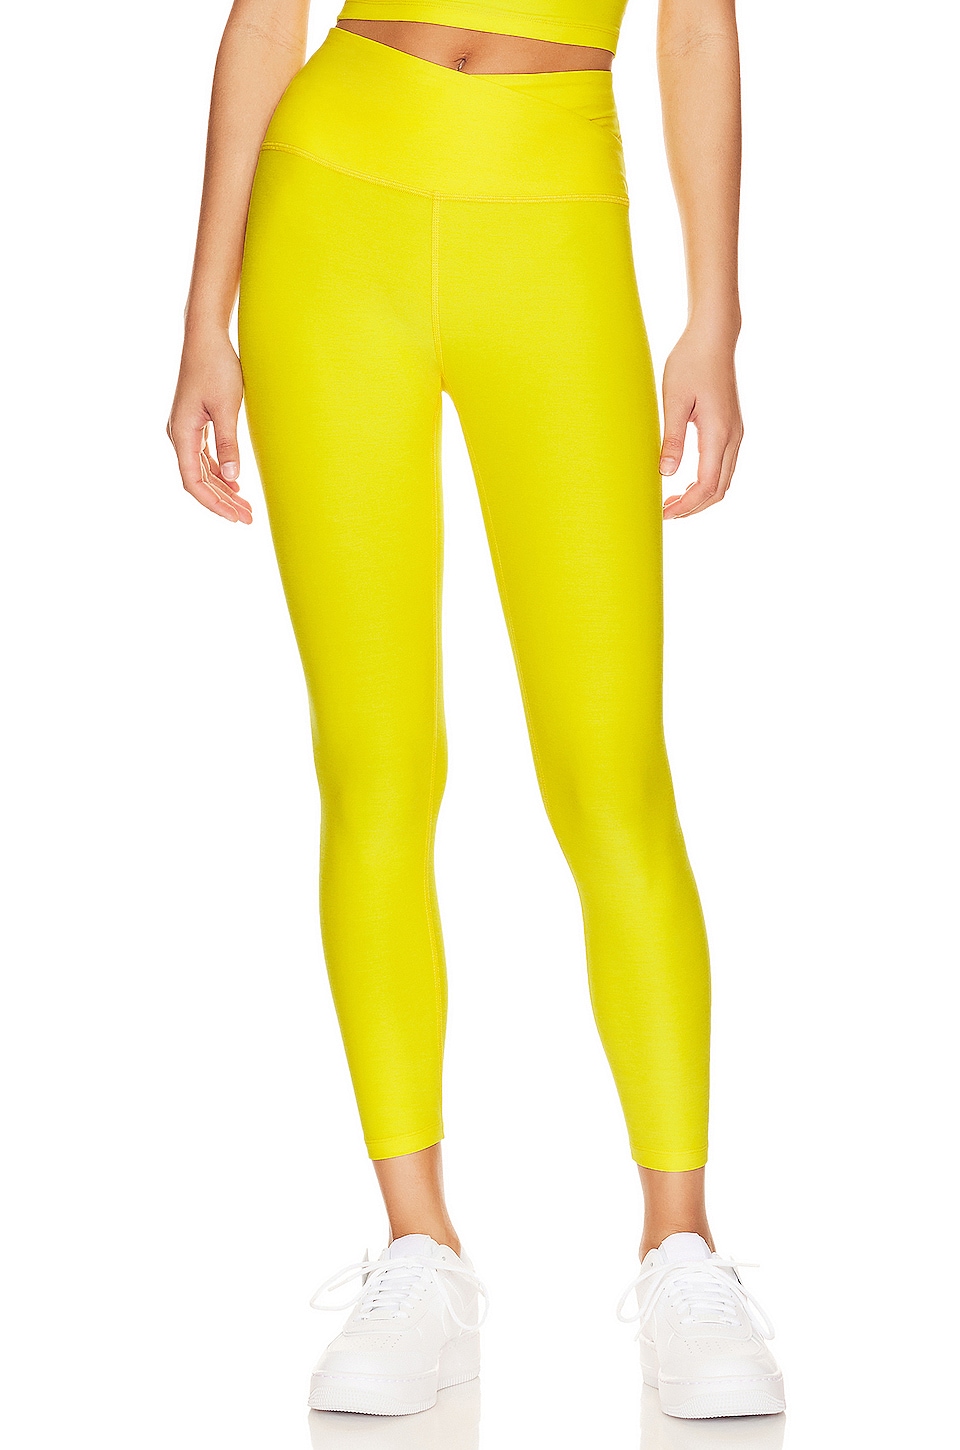 Beyond Yoga Spacedye At Your Leisure High Waisted Midi Legging in Yellow  Flower Heather